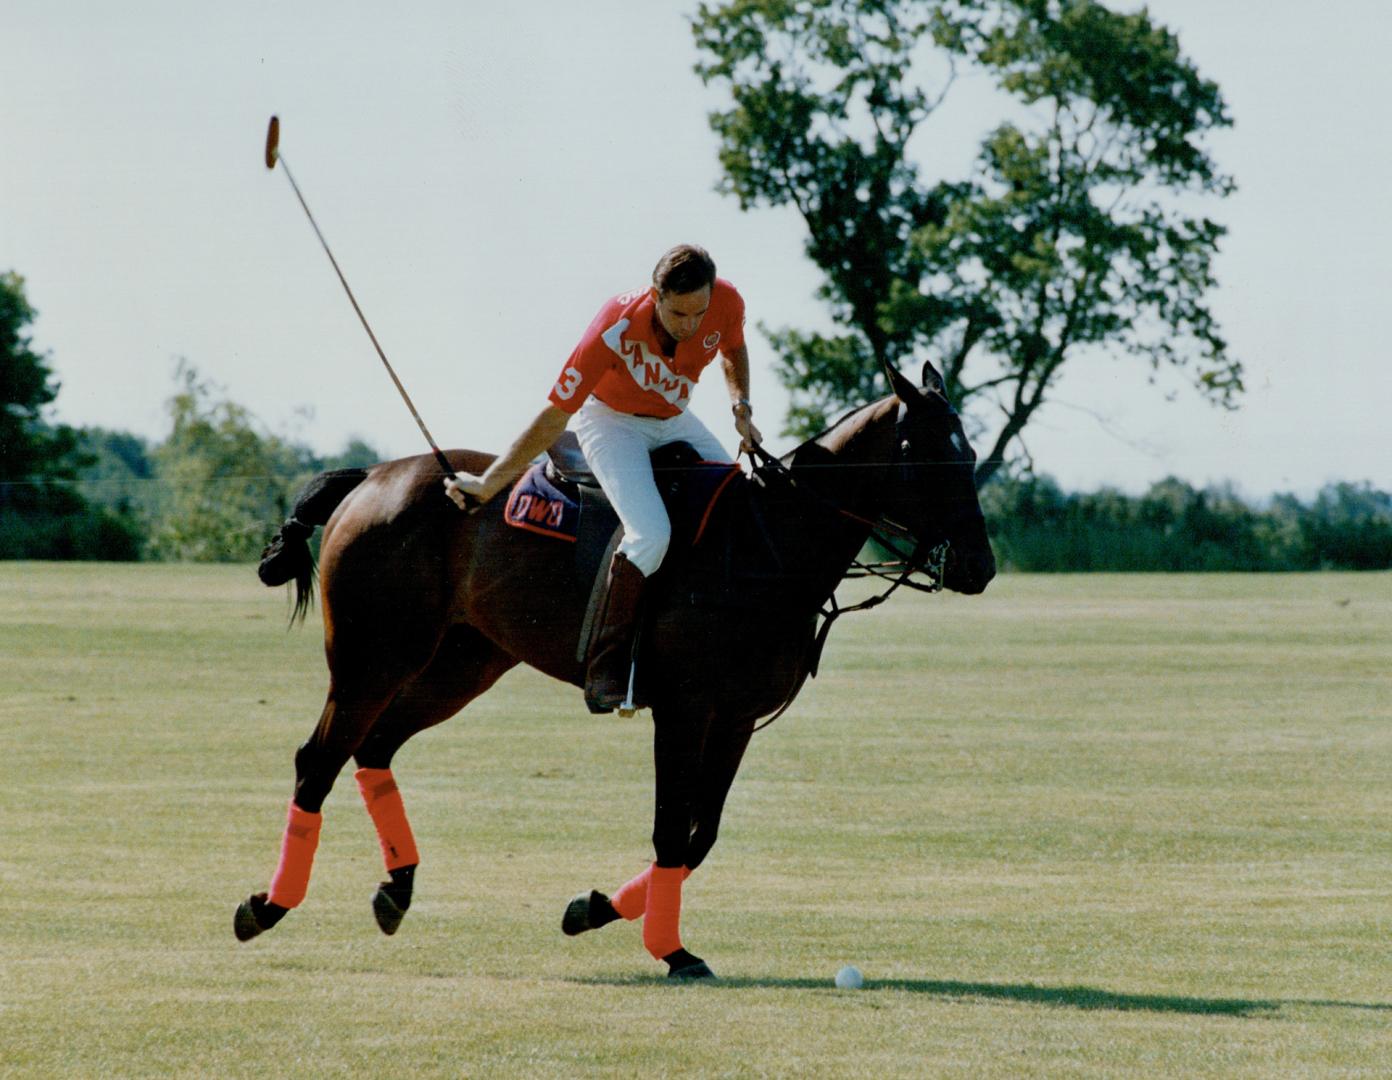 Dave and Billy Joe on the range, Dave Offen, 29, on one of his horses, Billy Joe, shows the style that makes him one of Canada's best polo players